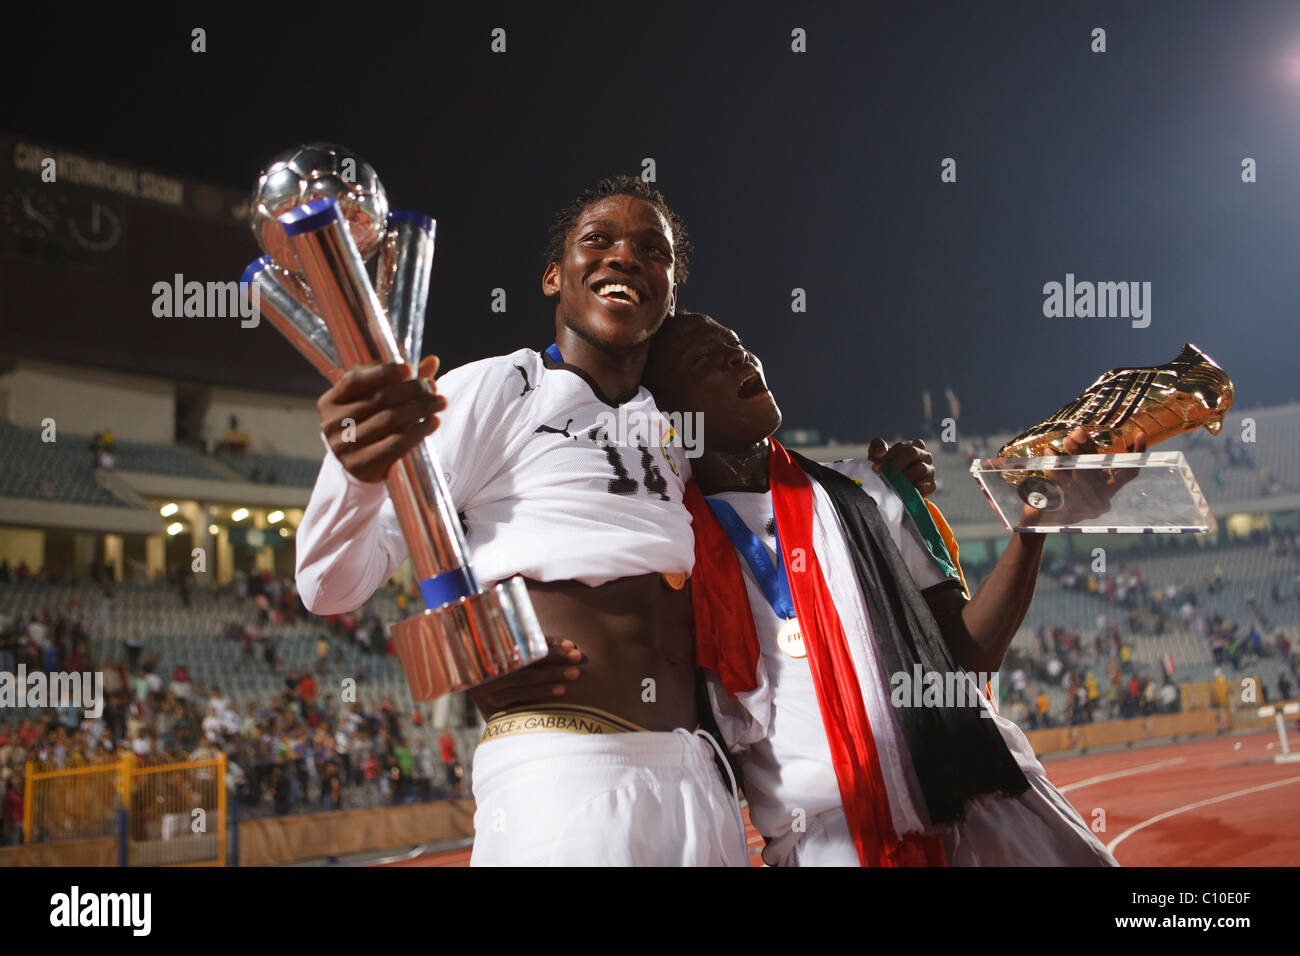 Ghana players Daniel Opare (l) and Dominic Adiyiah (r) celebrate after defeating Brazil to win the 2009 FIFA U-20 World Cup. Stock Photo